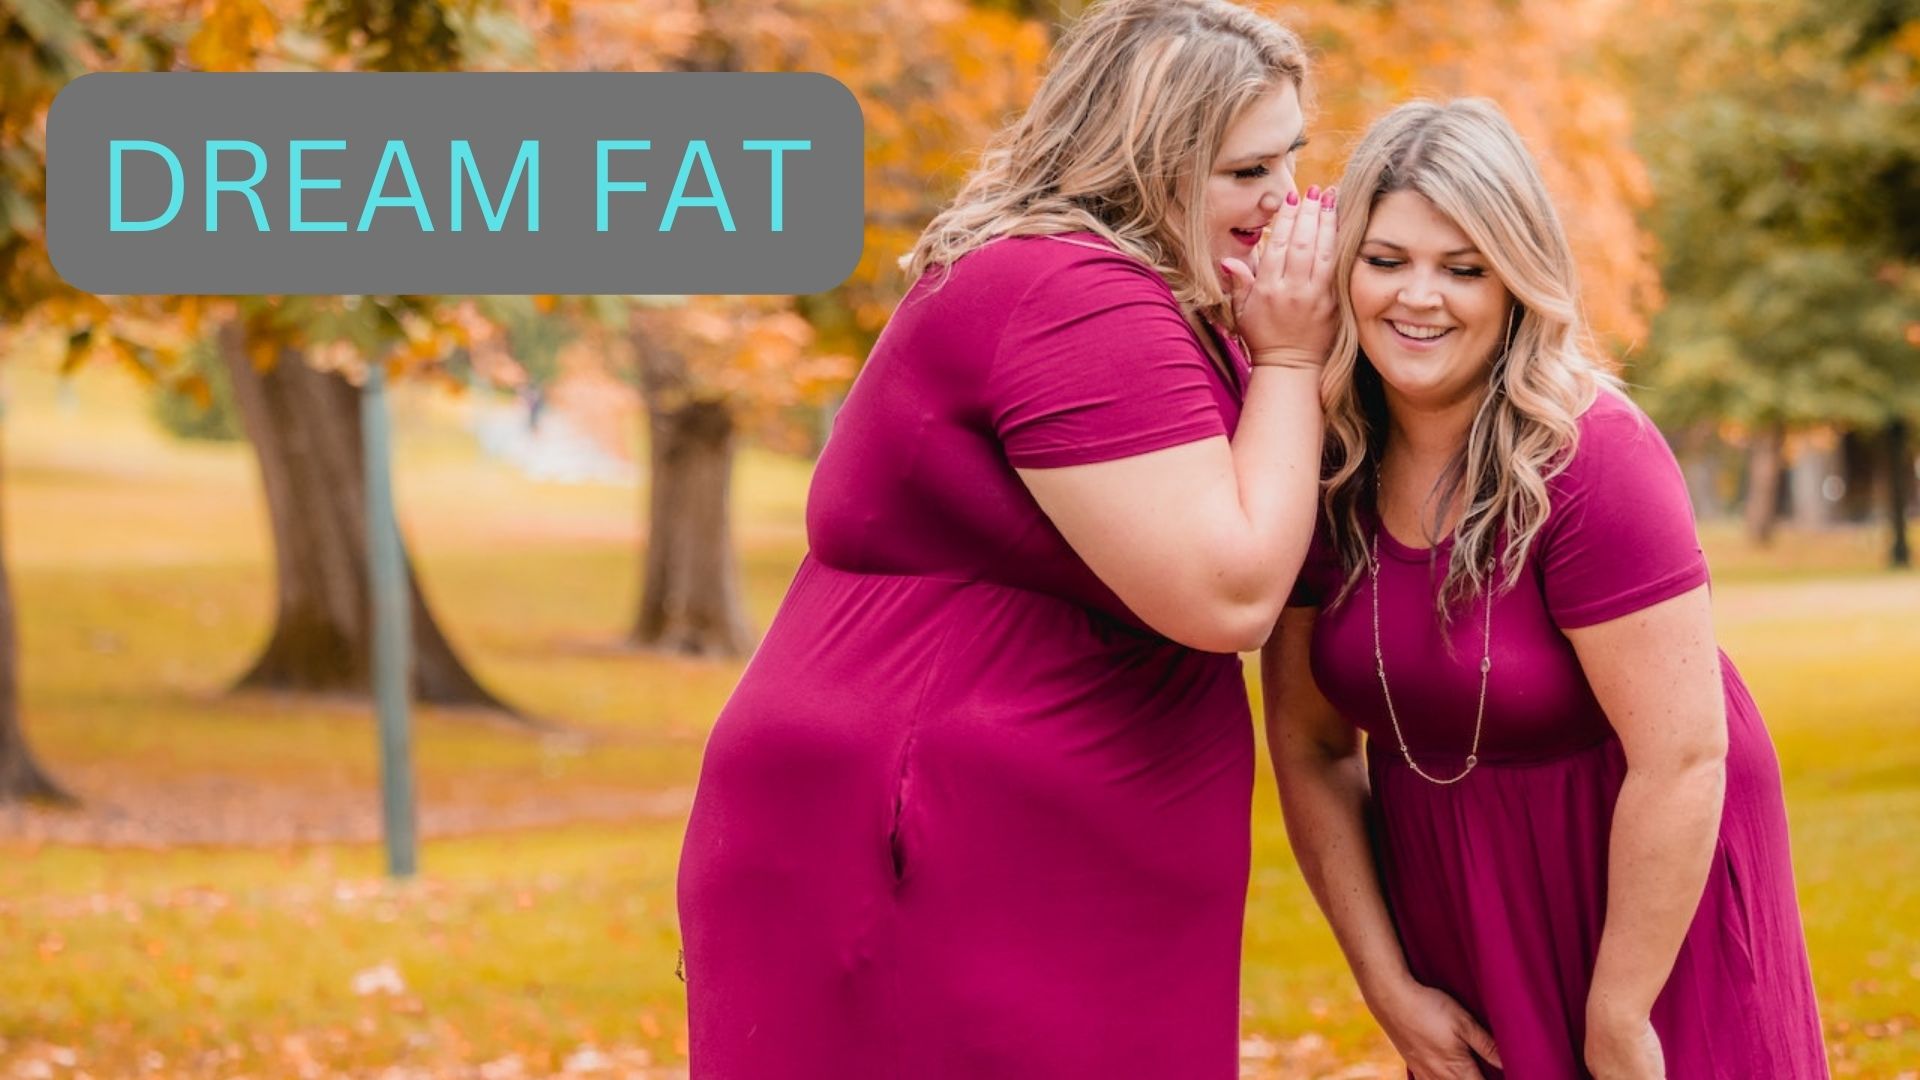 Dream Fat - An Omen Of Prosperity And Happiness